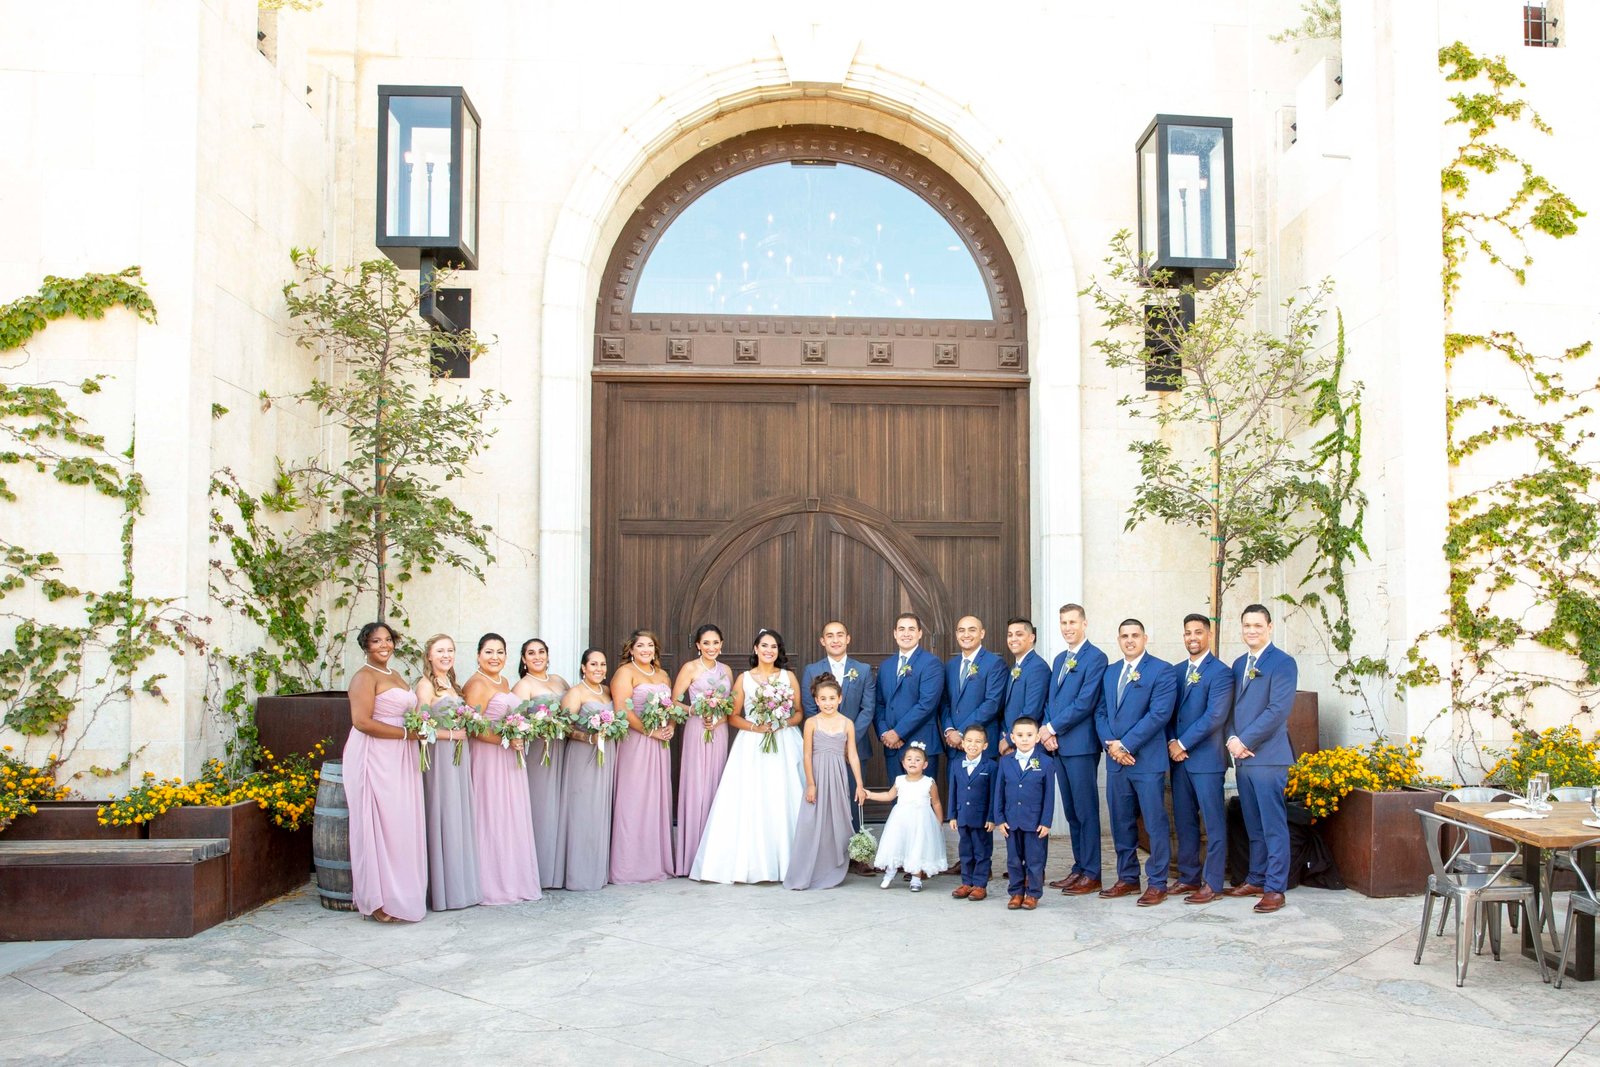 Bride and groom with the full wedding party in front of the main double doors at Tooth and Nail Winery